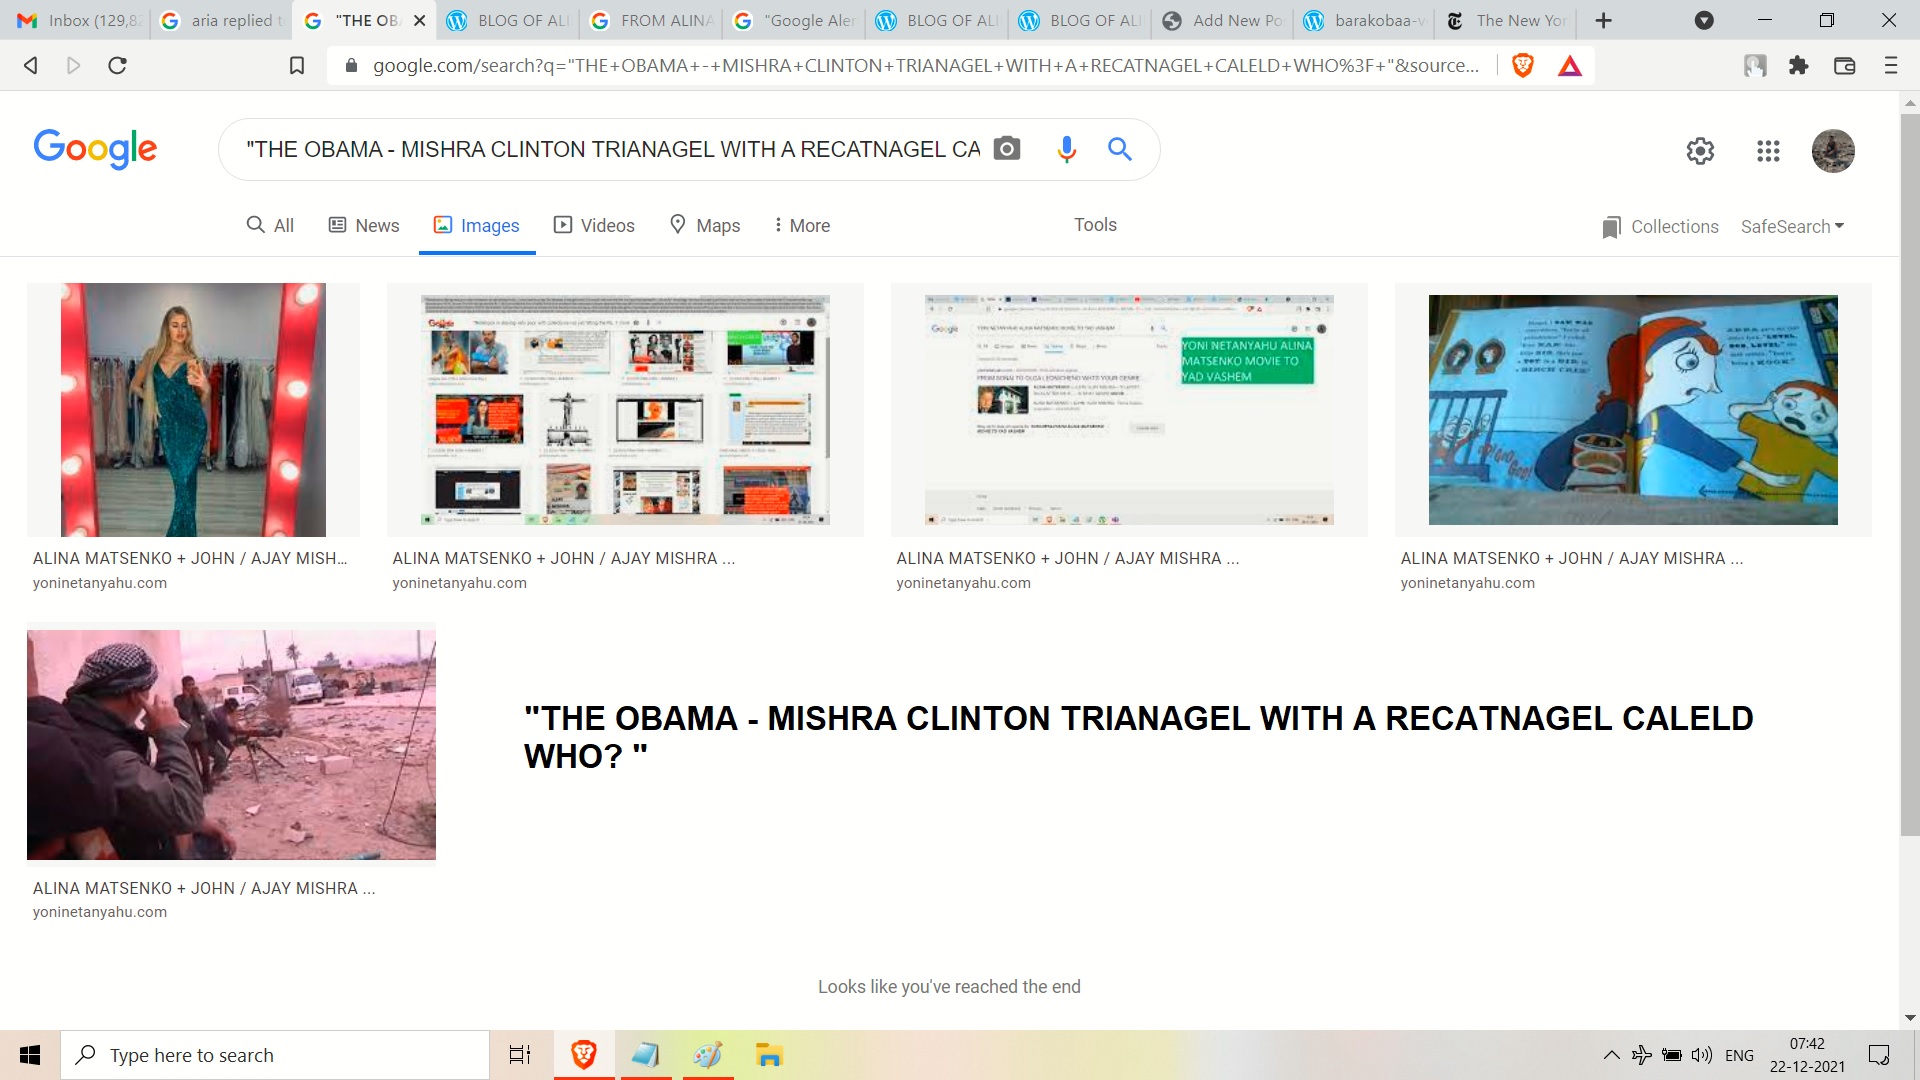 THE OBAMA - MISHRA CLINTON TRIANAGEL WITH A RECATNAGEL CALELD WHO....